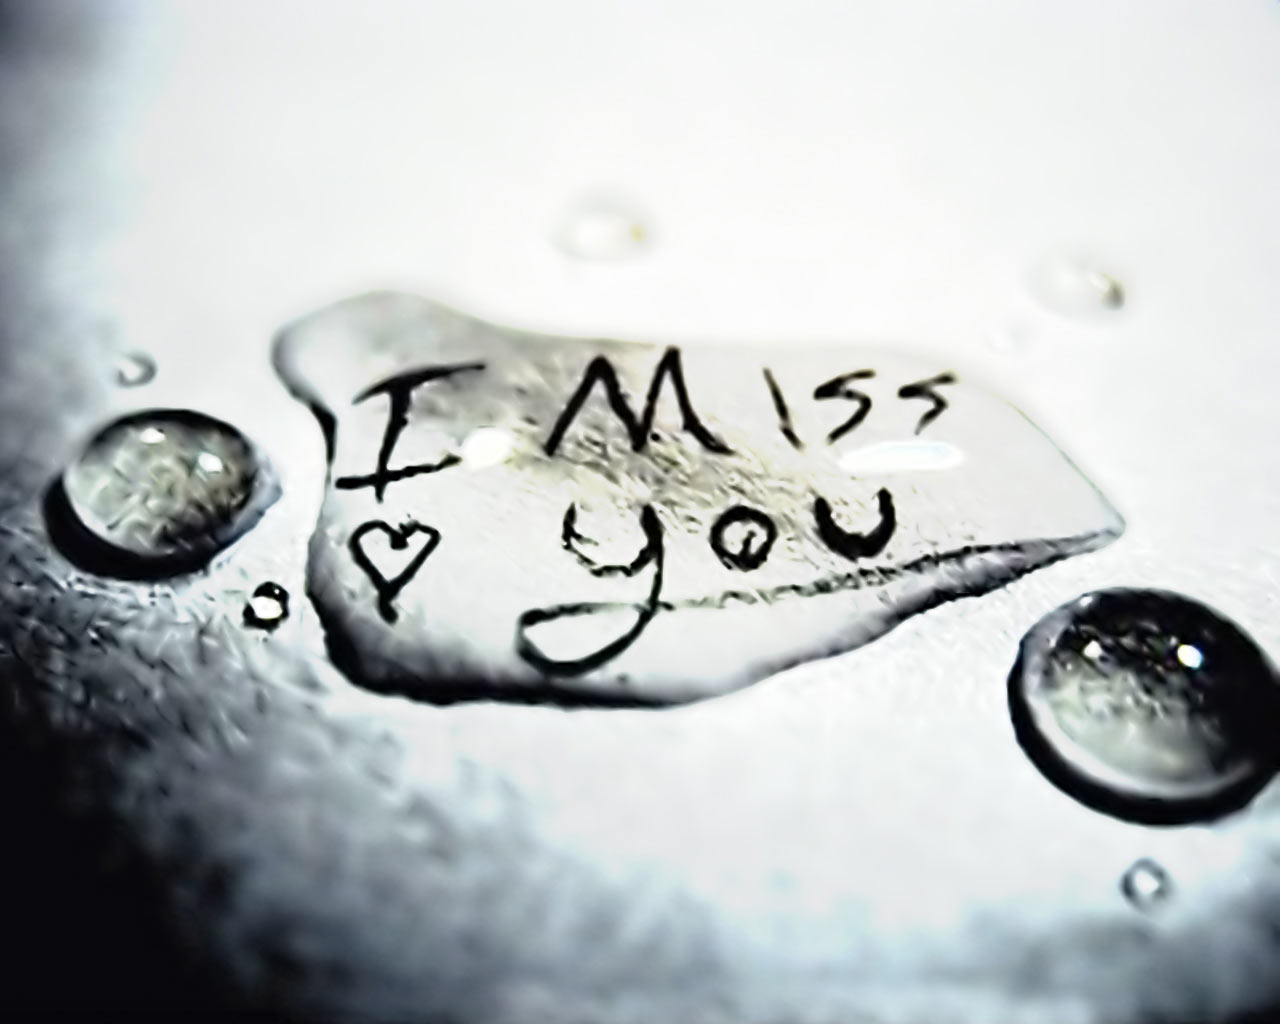 WELCOME TO MY BLOGG***: I MISS U WALLPAPER****